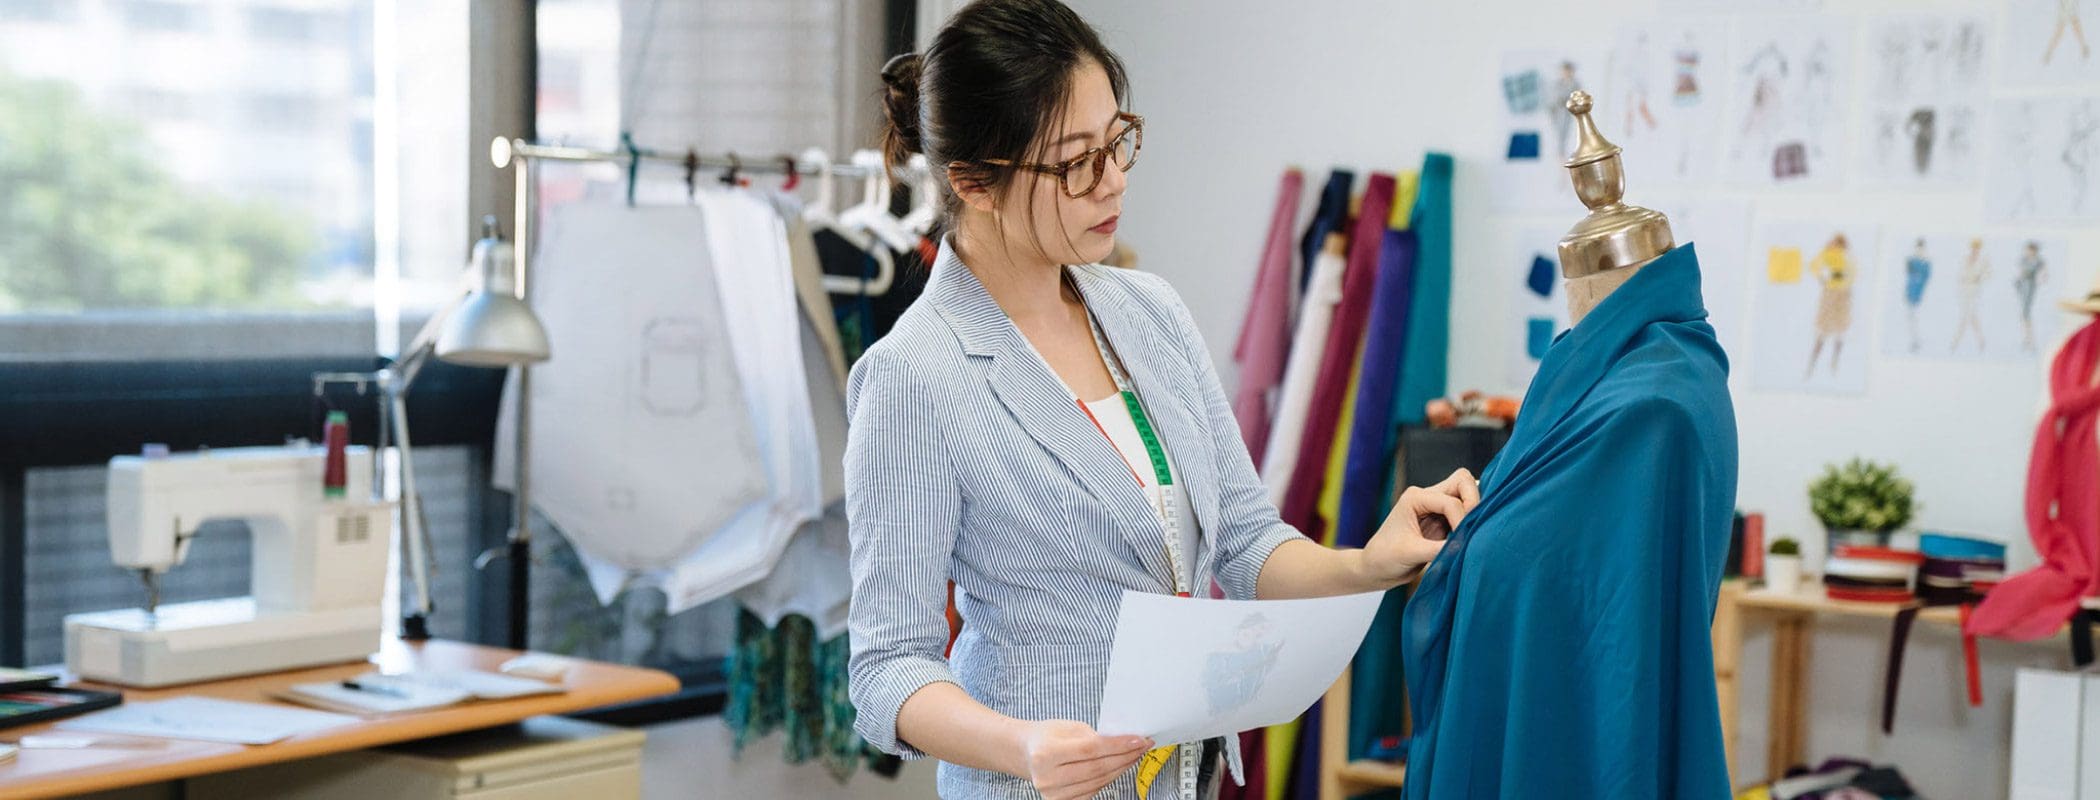 Digitizing the Quality Control Process with Rizing’s Q² Fashion Quality Management Solution ™